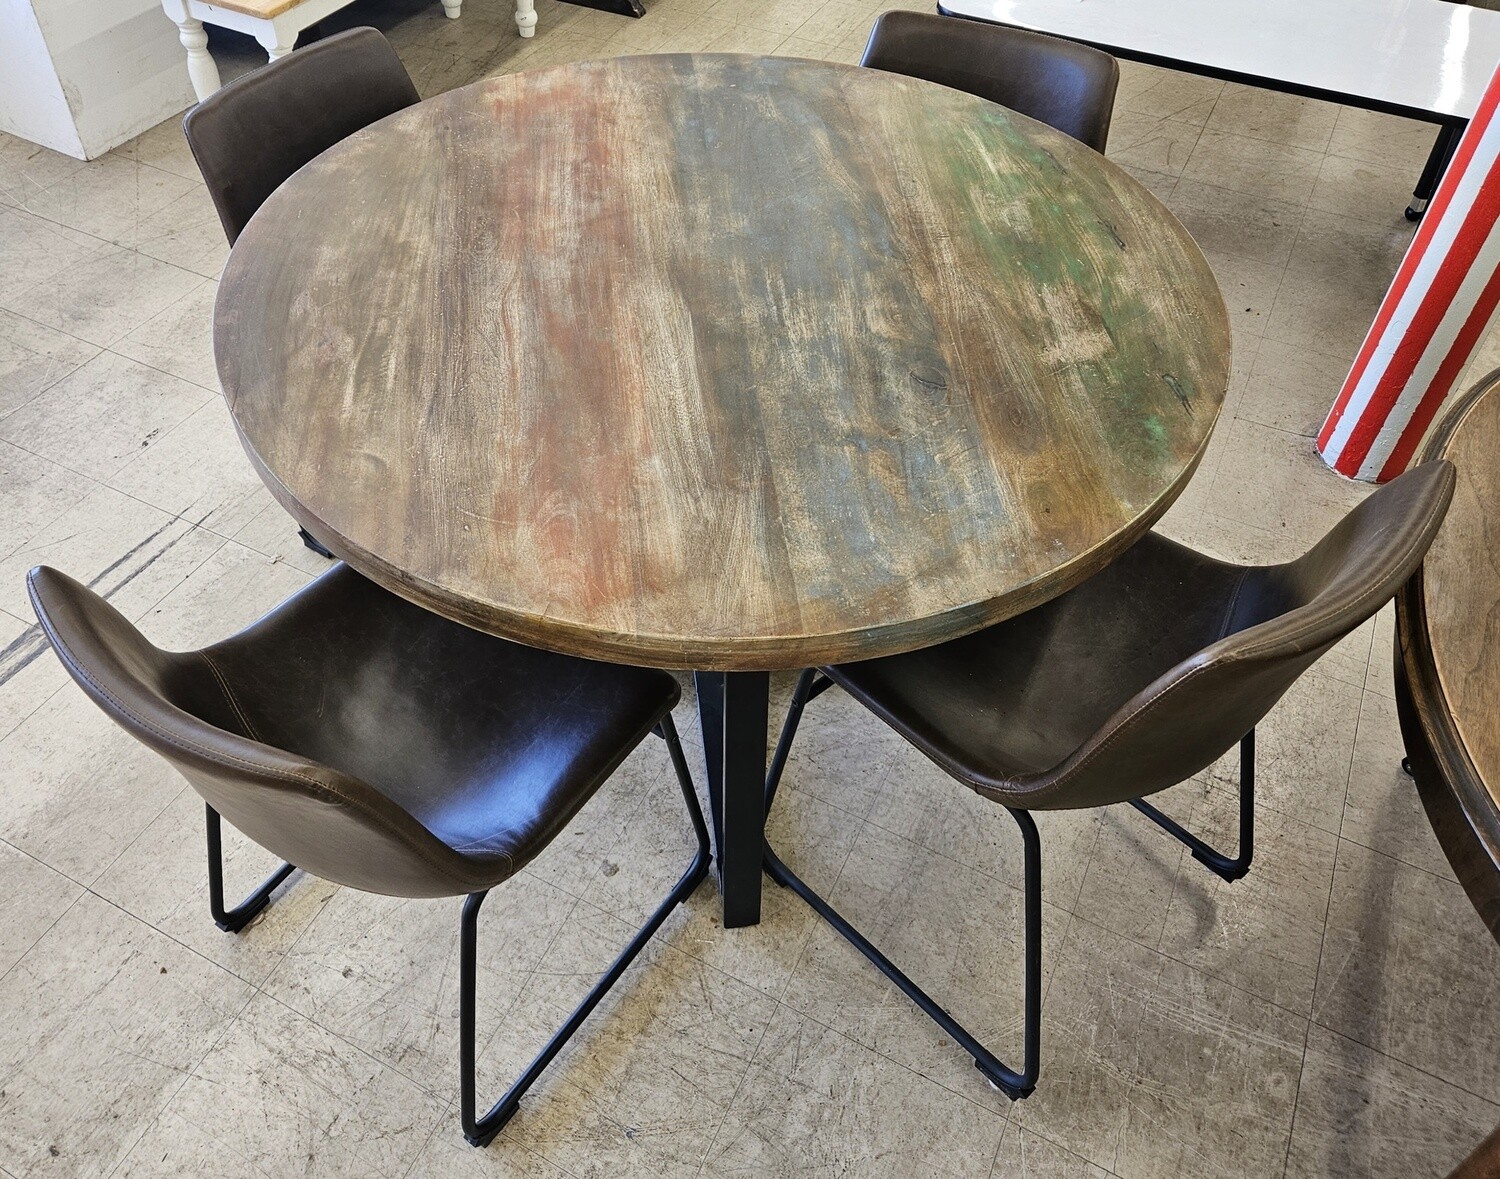 Hightop Round Table & Chairs